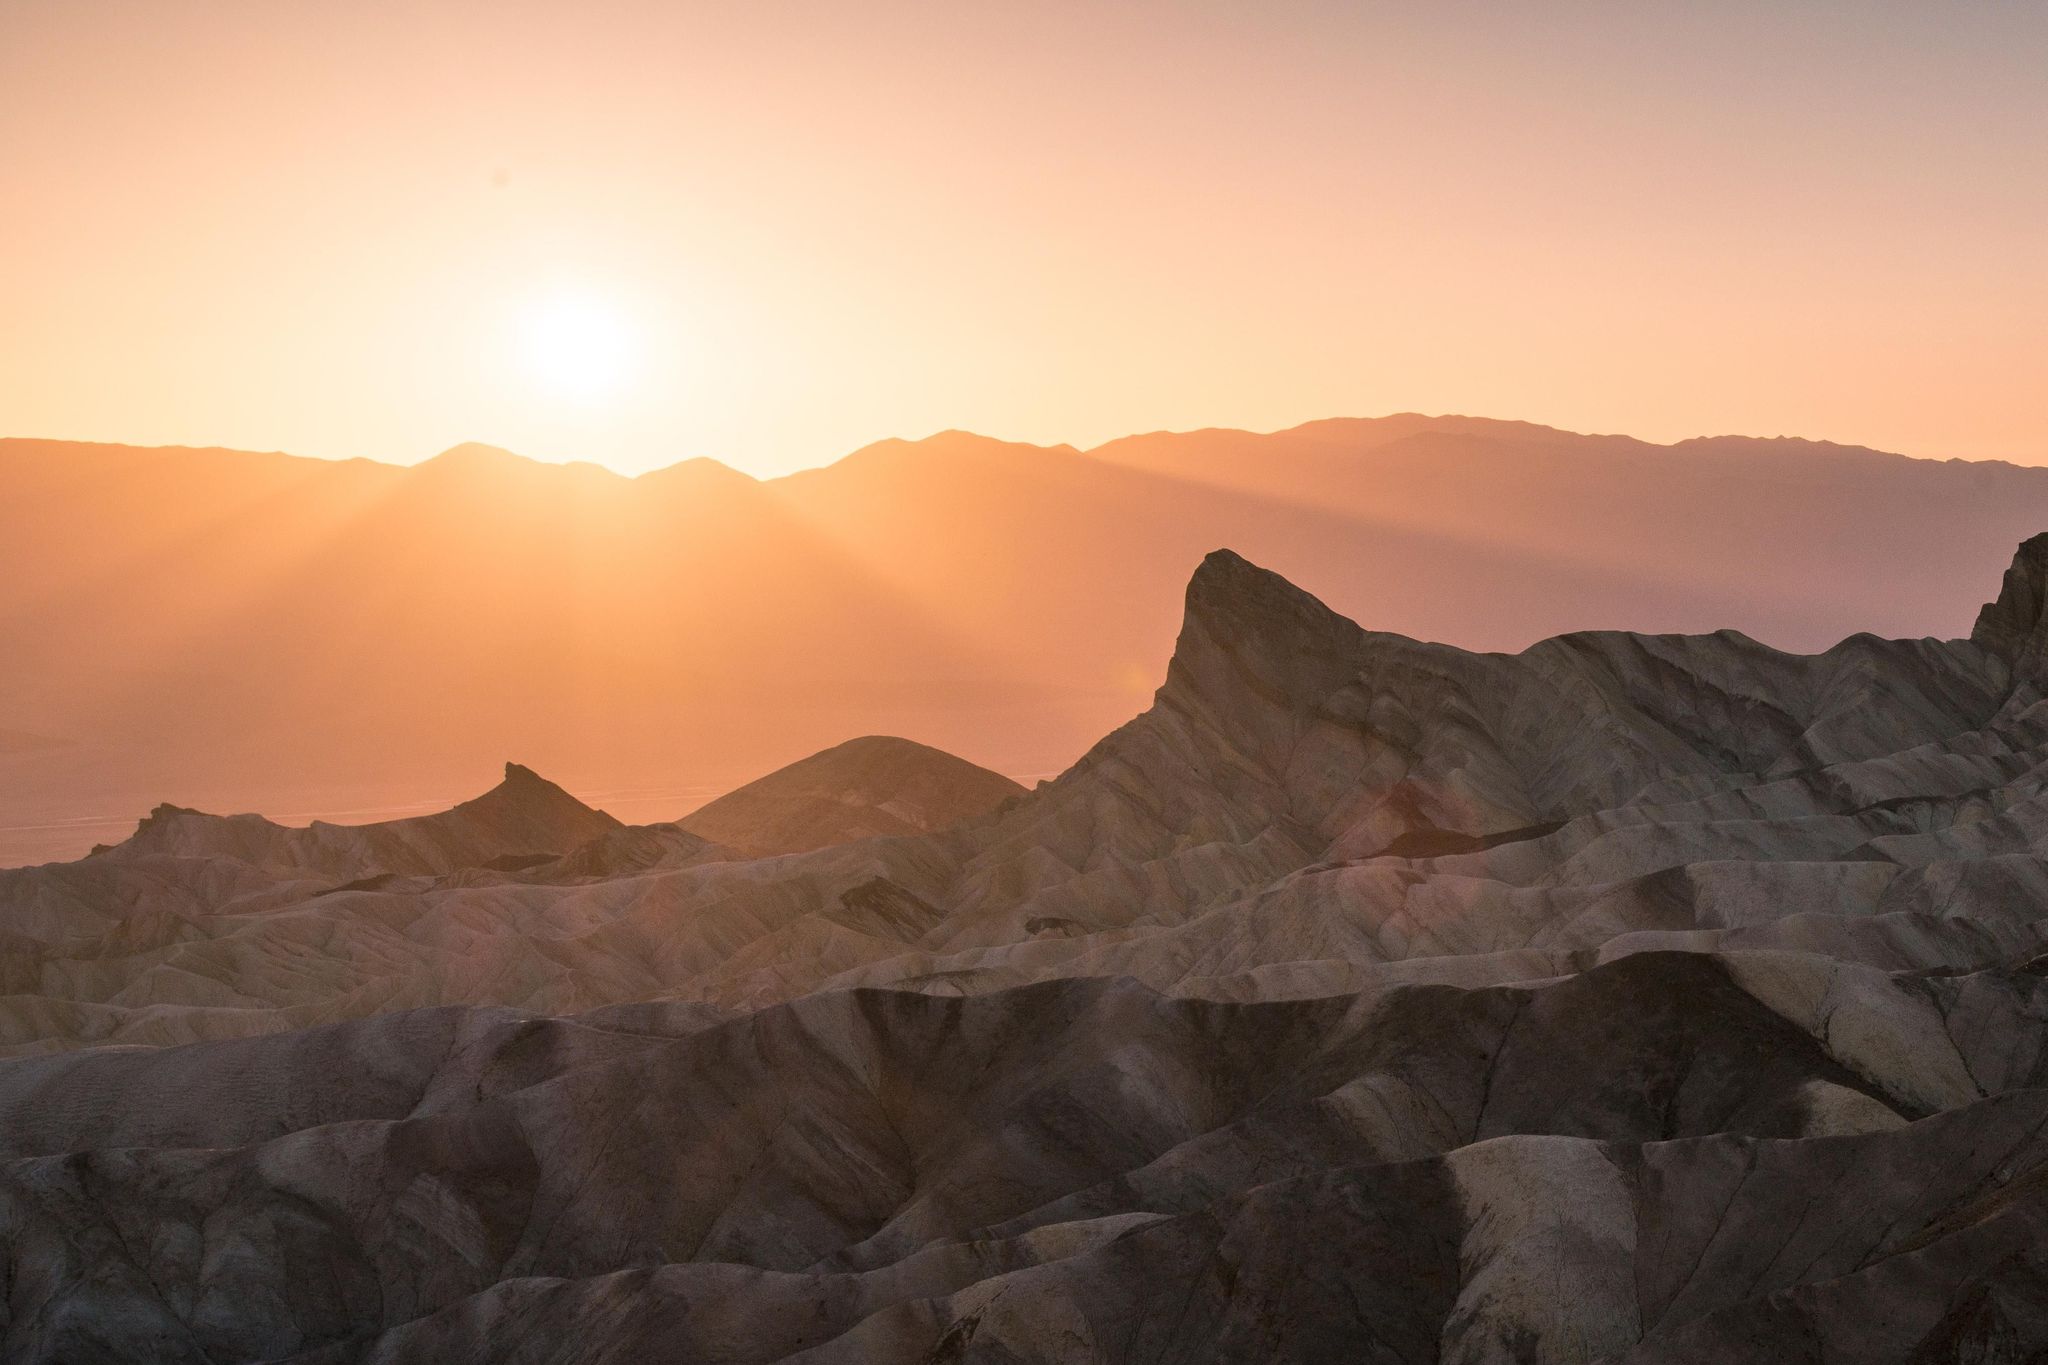 The warm light of sunset covers the badlands at Zabriskie Point.